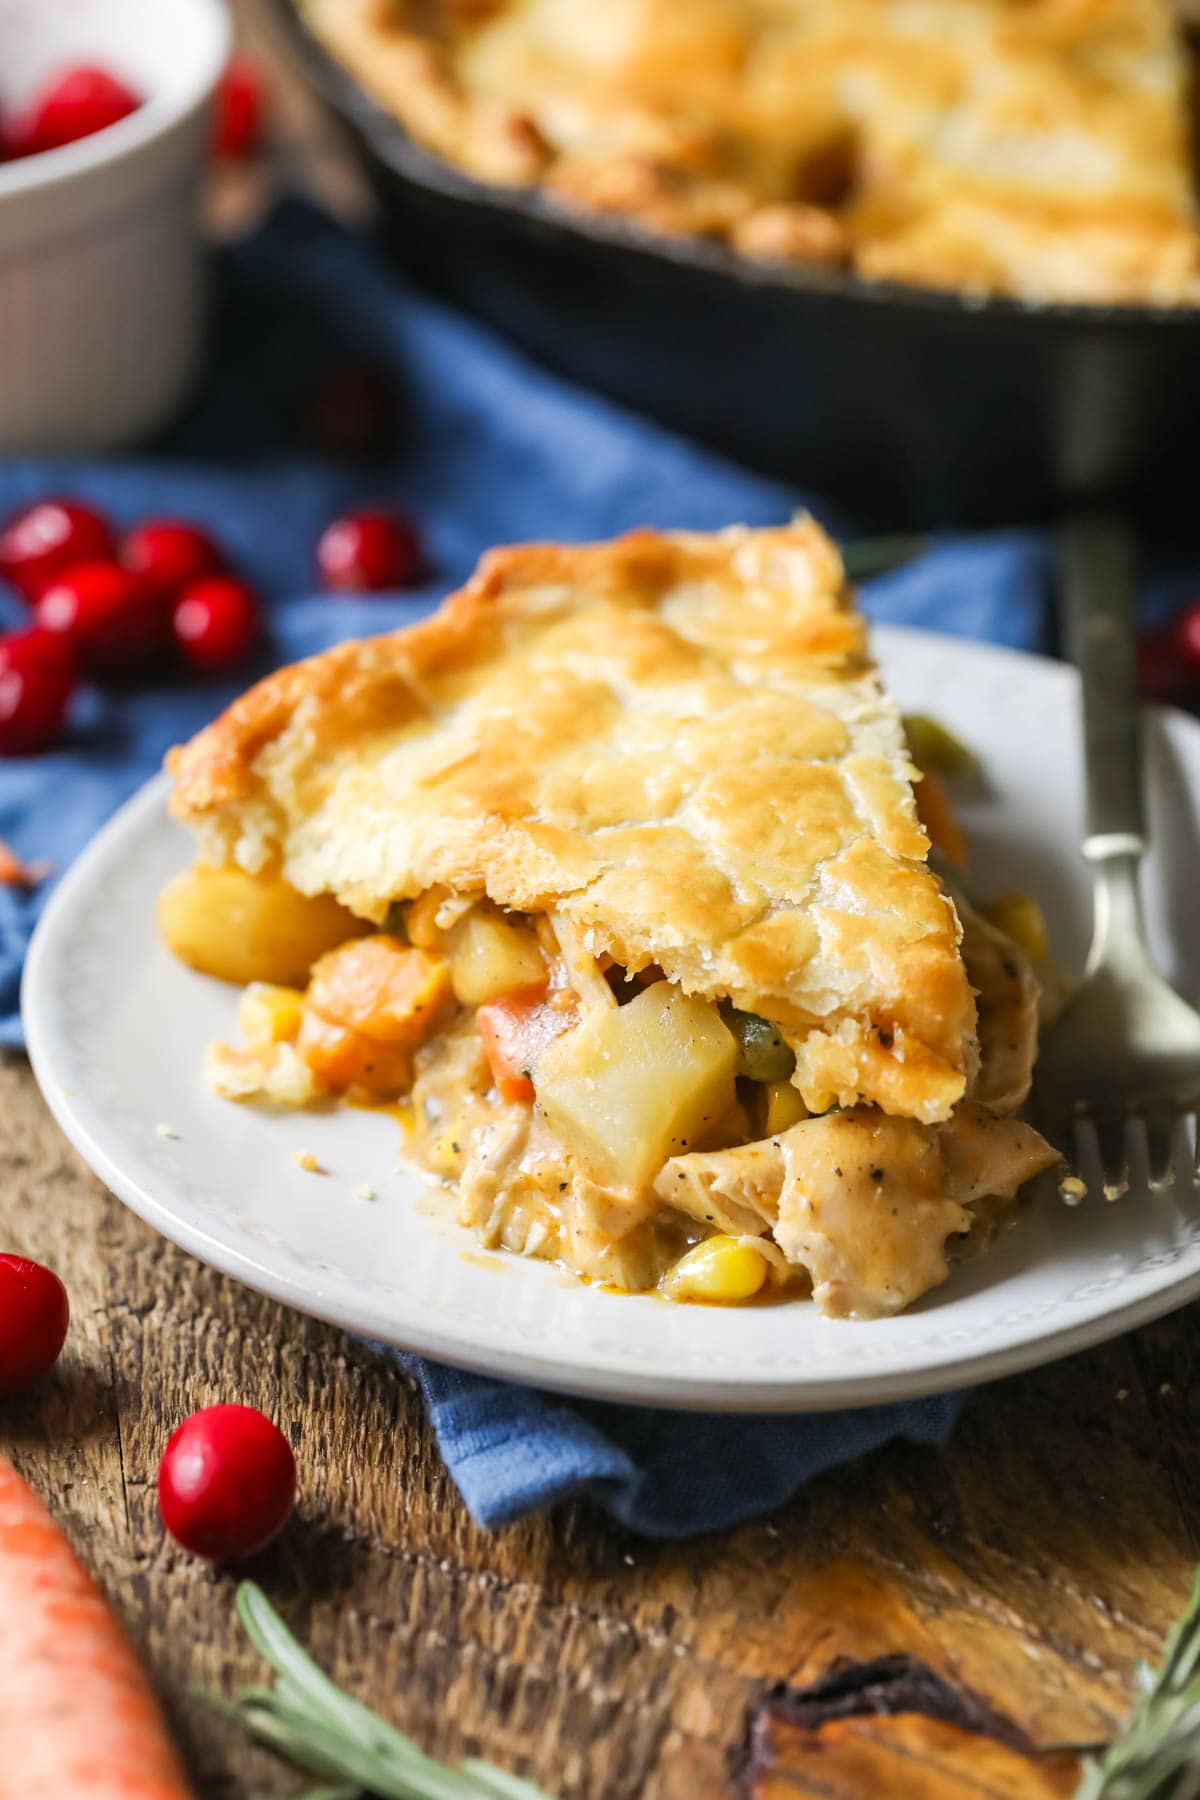 Slice of pot pie made with turkey and vegetables on a plate.